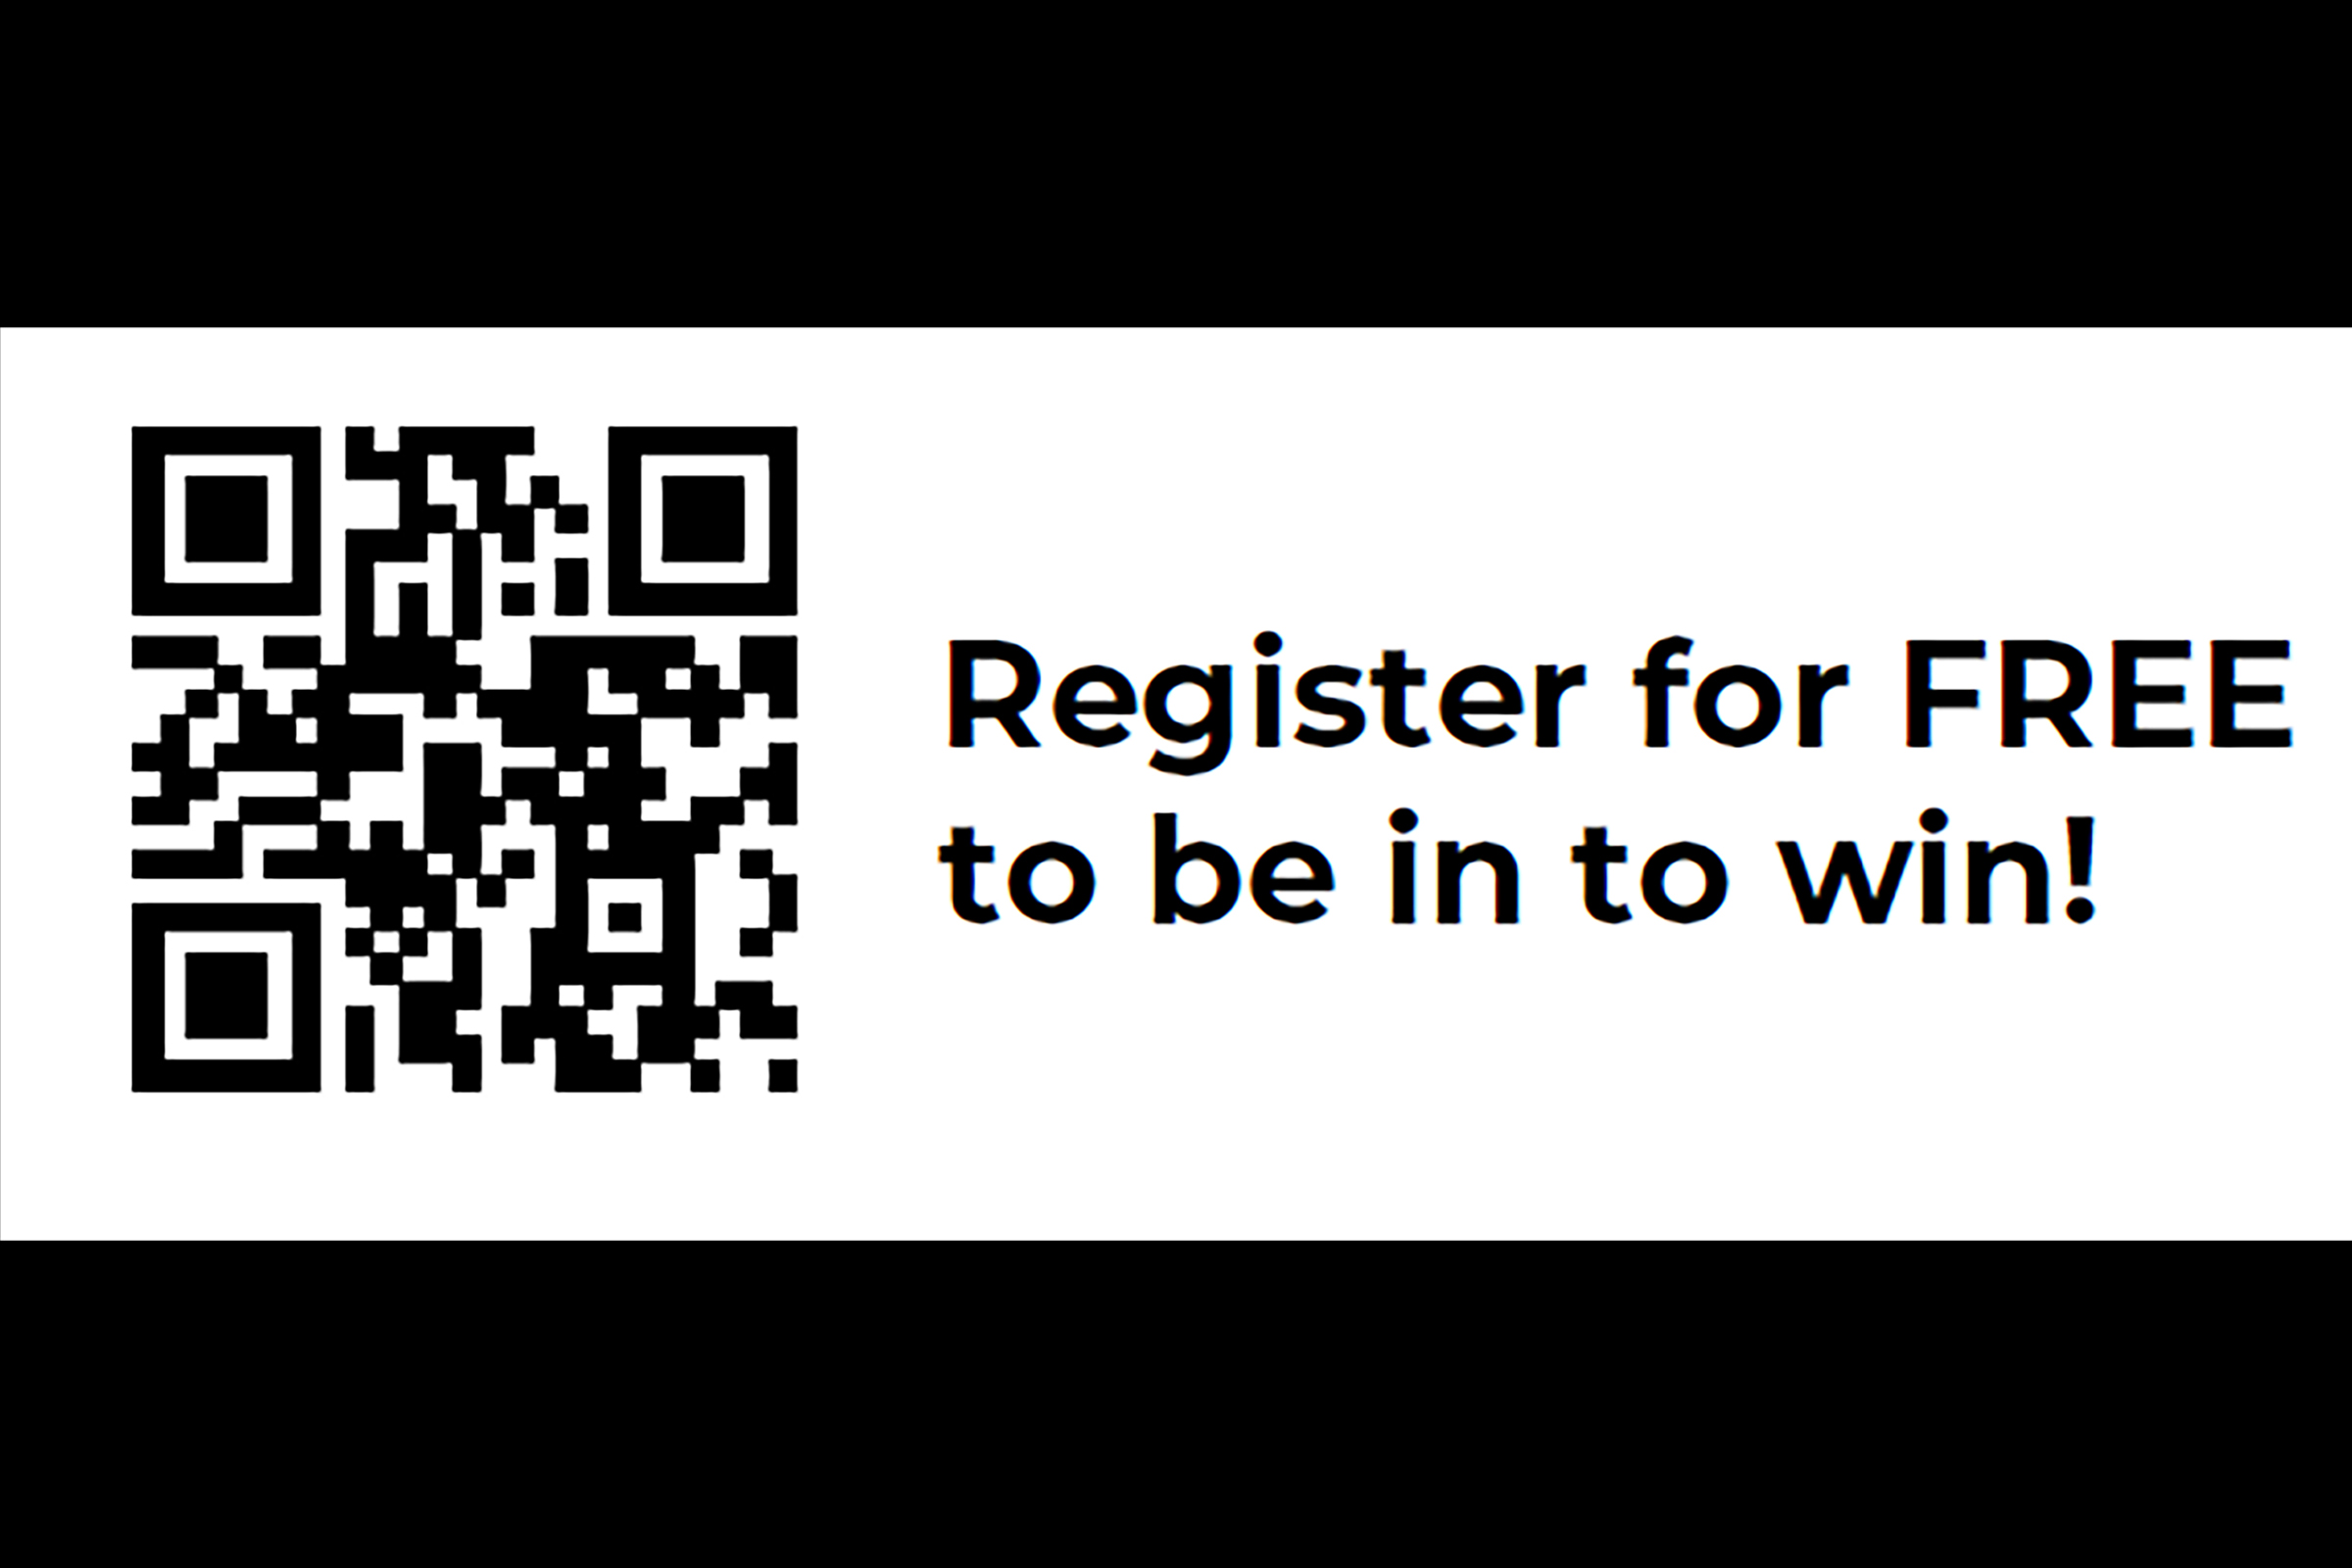 QR code with wording to the side, Register for free to be in to win.